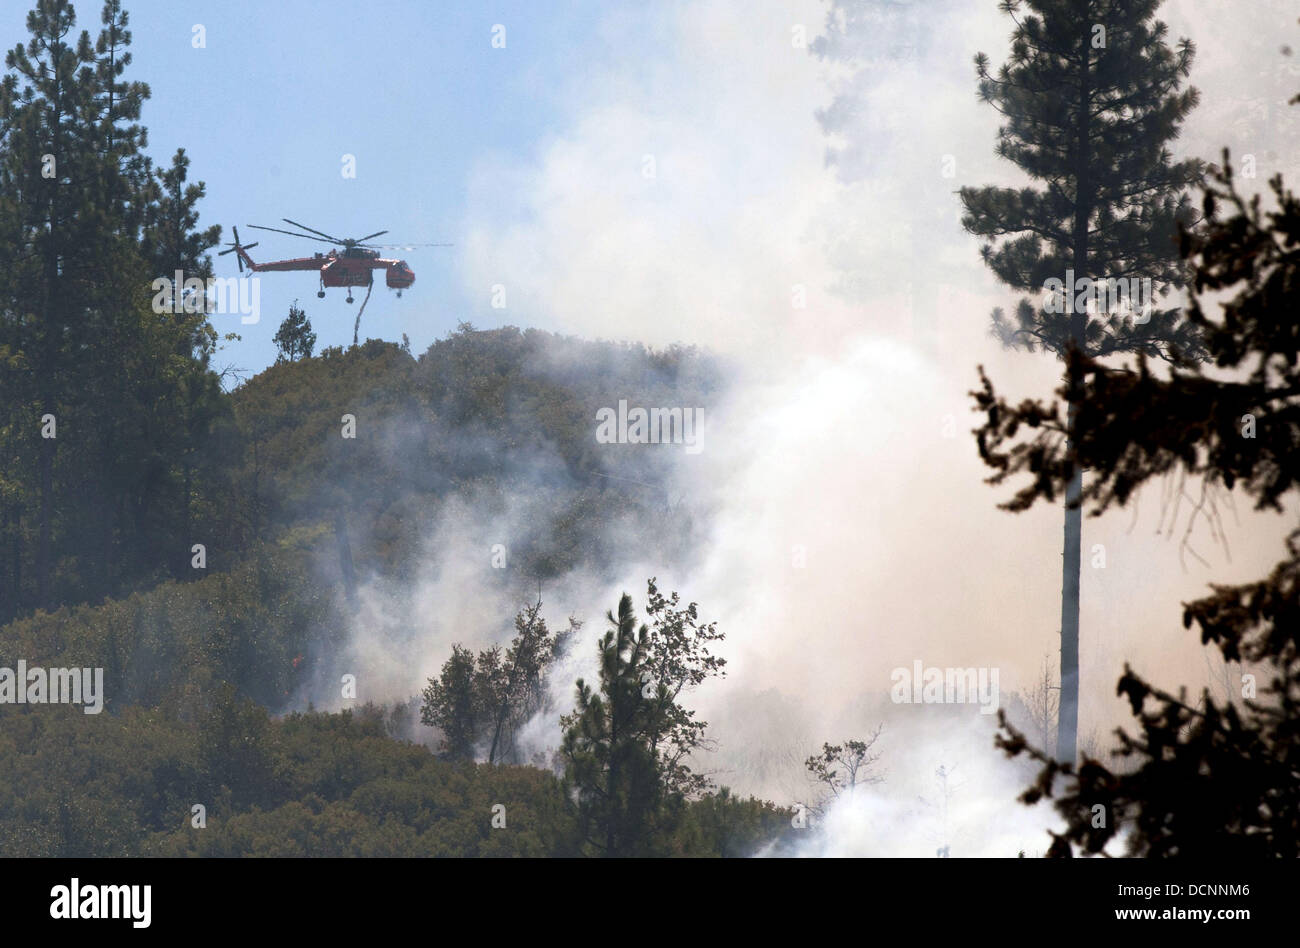 Buck Meadows, CA, USA. 20th Aug, 2013. A helicopter approaches a fire line to drop a load of water on the south west flank of the Rim Fire. The Rim Fire in the Stanislaus National Forest along Highway 120 has grown to over 10,000 acres as of August 20th 2013 with no containment. Over the past three days active fire has move up both sides of Jawbone Ridge, and the Tuolumne River. According to US Forest service website 2 homes have been lost and 5 outbuildings Credit:  Marty Bicek/ZUMAPRESS.com/Alamy Live News Stock Photo